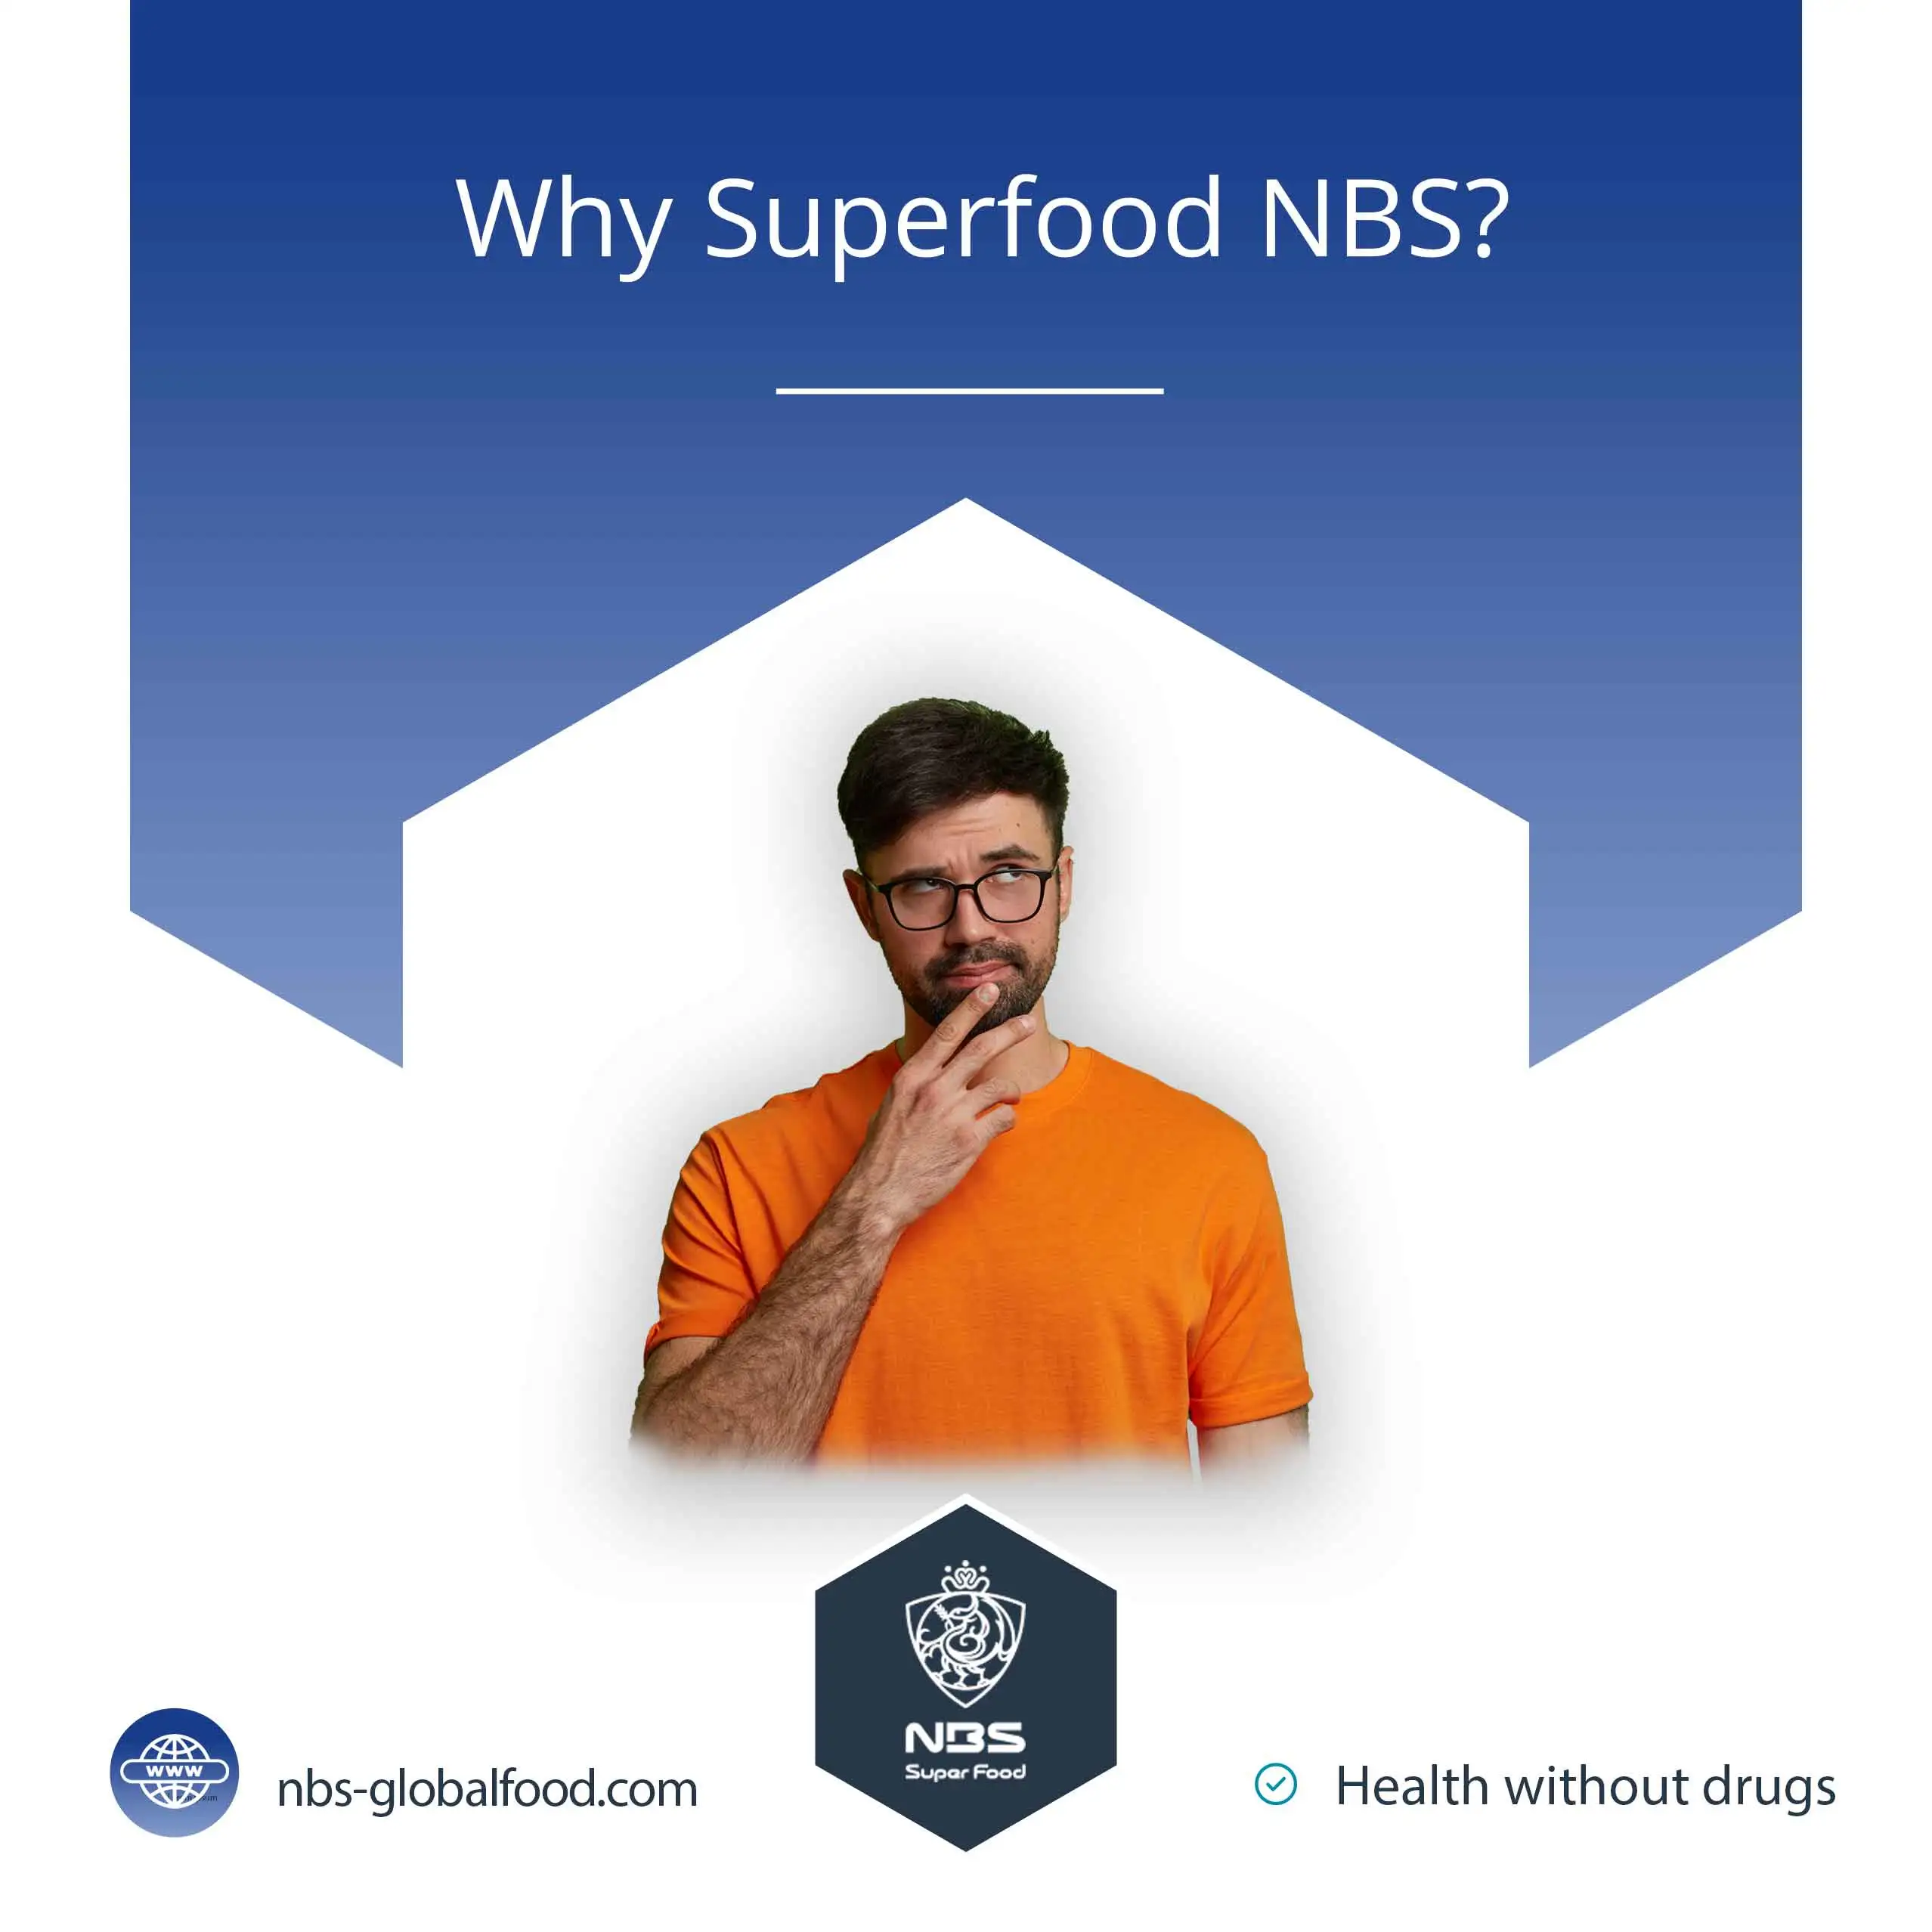 Why Superfood NBS?